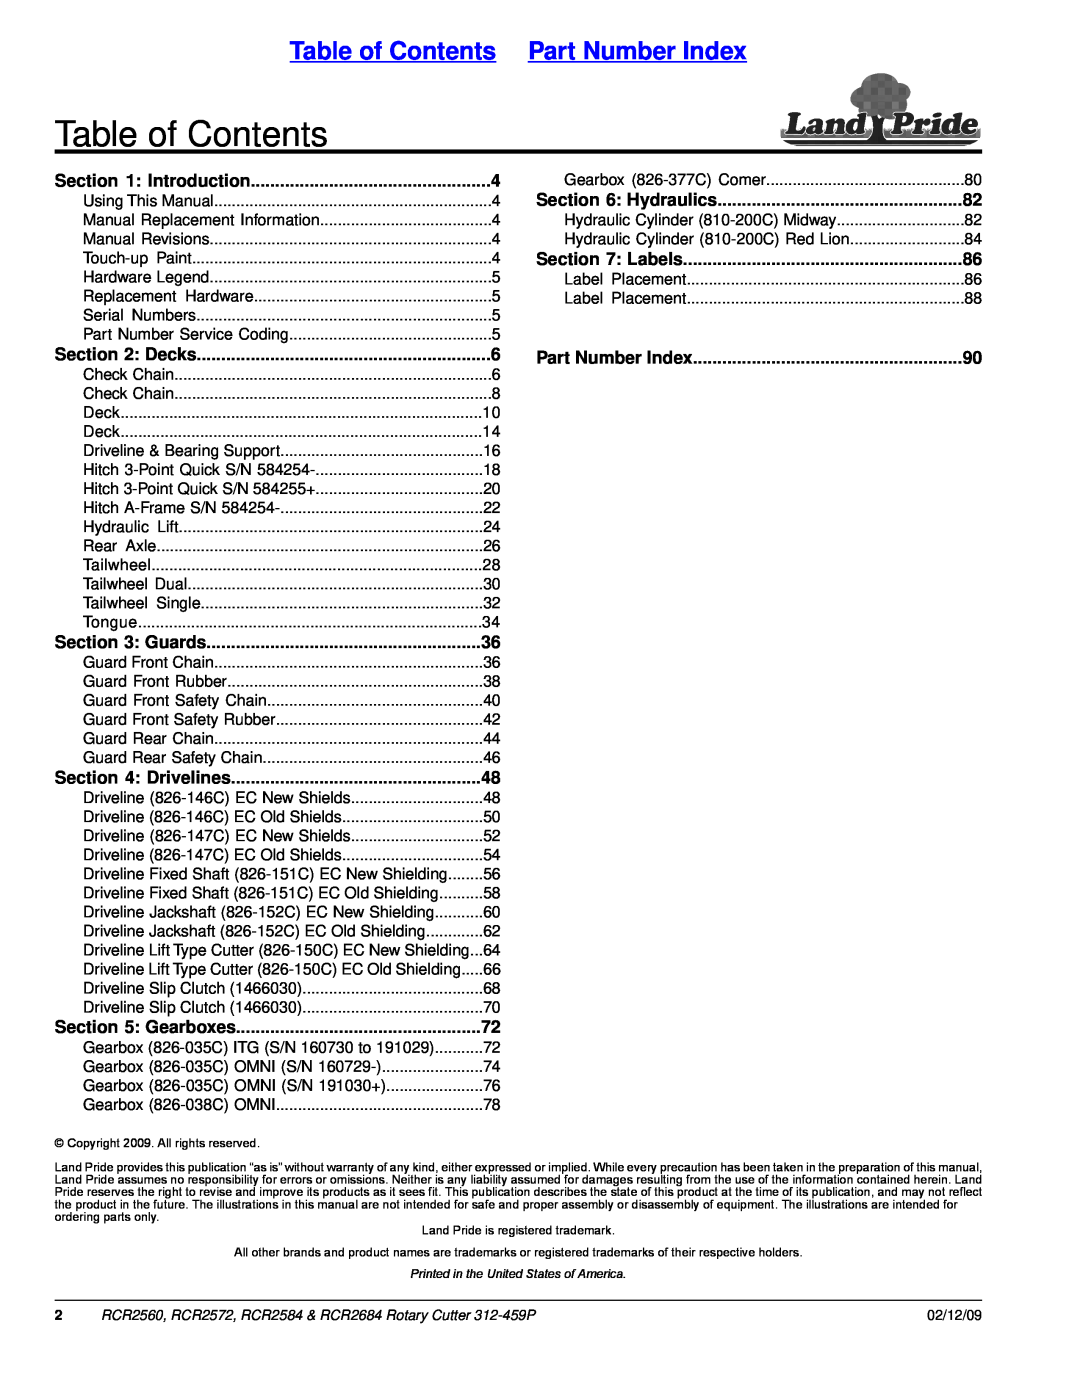 Land Pride RCR2572 Table of Contents Part Number Index, Introduction, Decks, Guards, Drivelines, Gearboxes, Hydraulics 